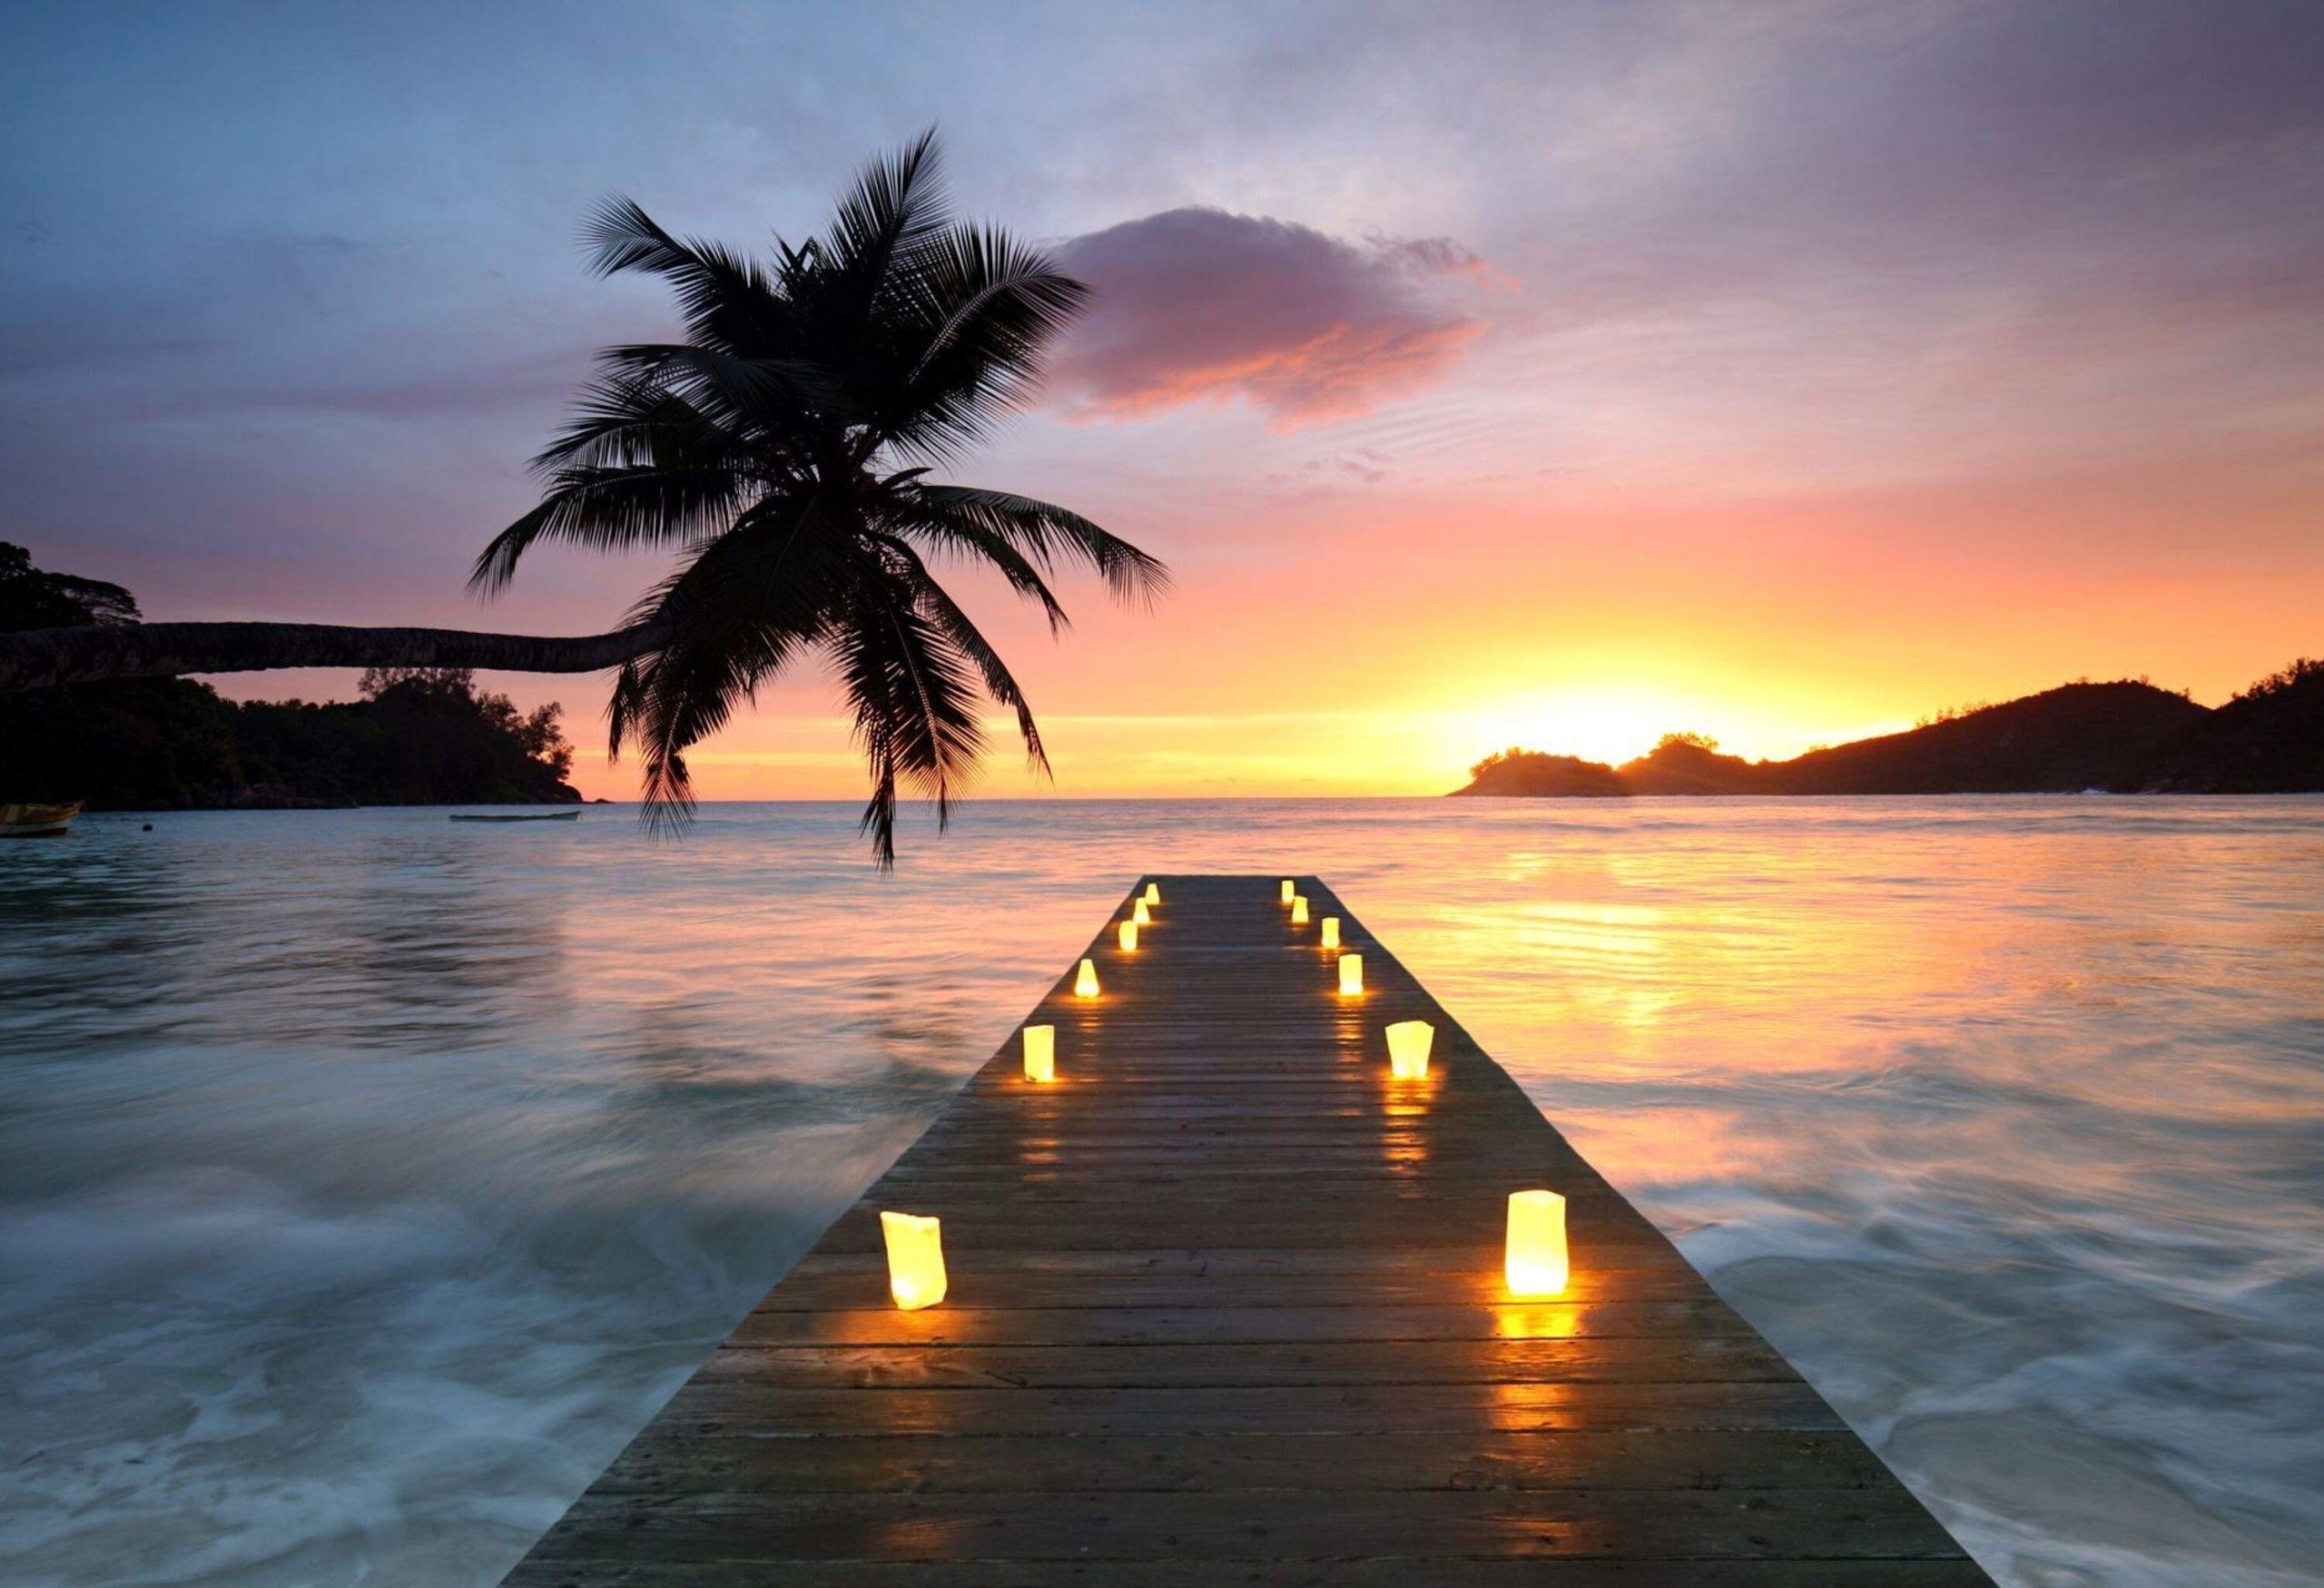 A wooden dock with lit candles extends to the misty seawater with a leaning palm tree on a scenic sunset.